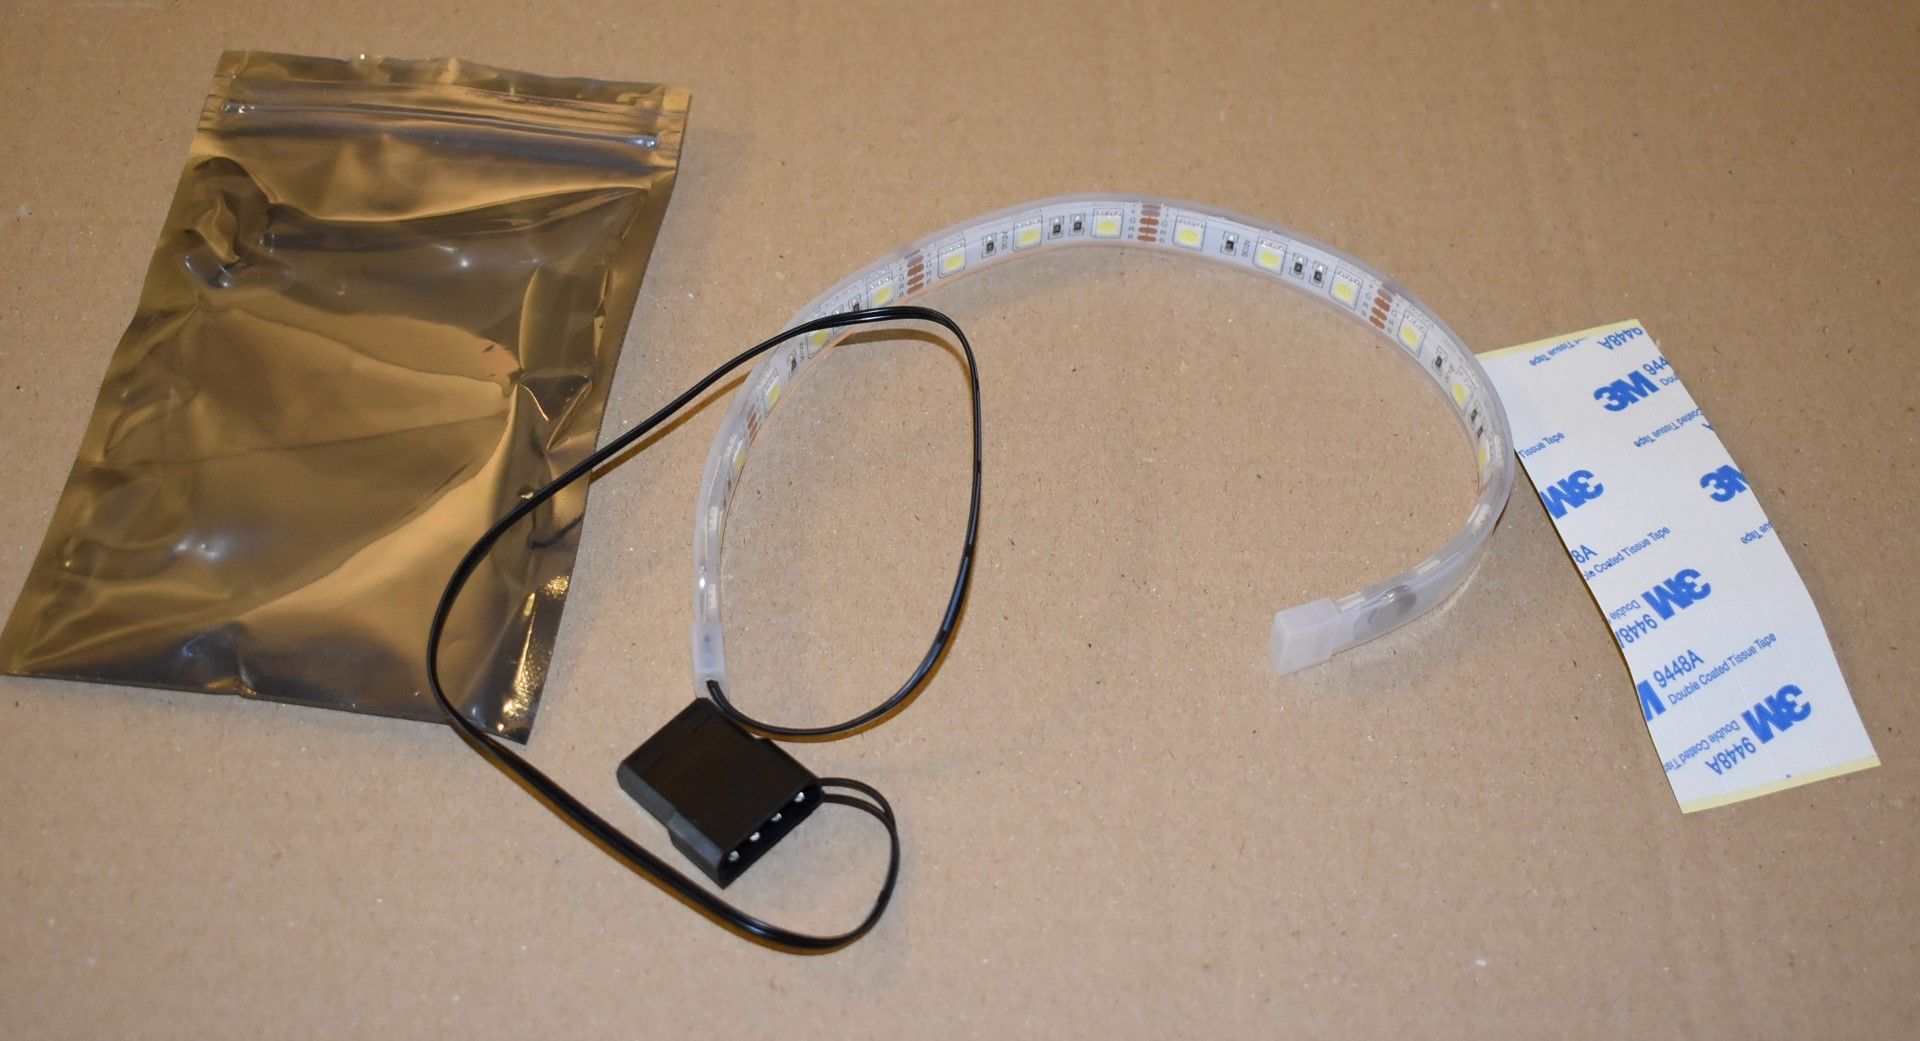 200 x PC Case Illumination 12 Inch LED Strips With Molex Connectors - New Sealed Packets - Ref: - Image 5 of 5